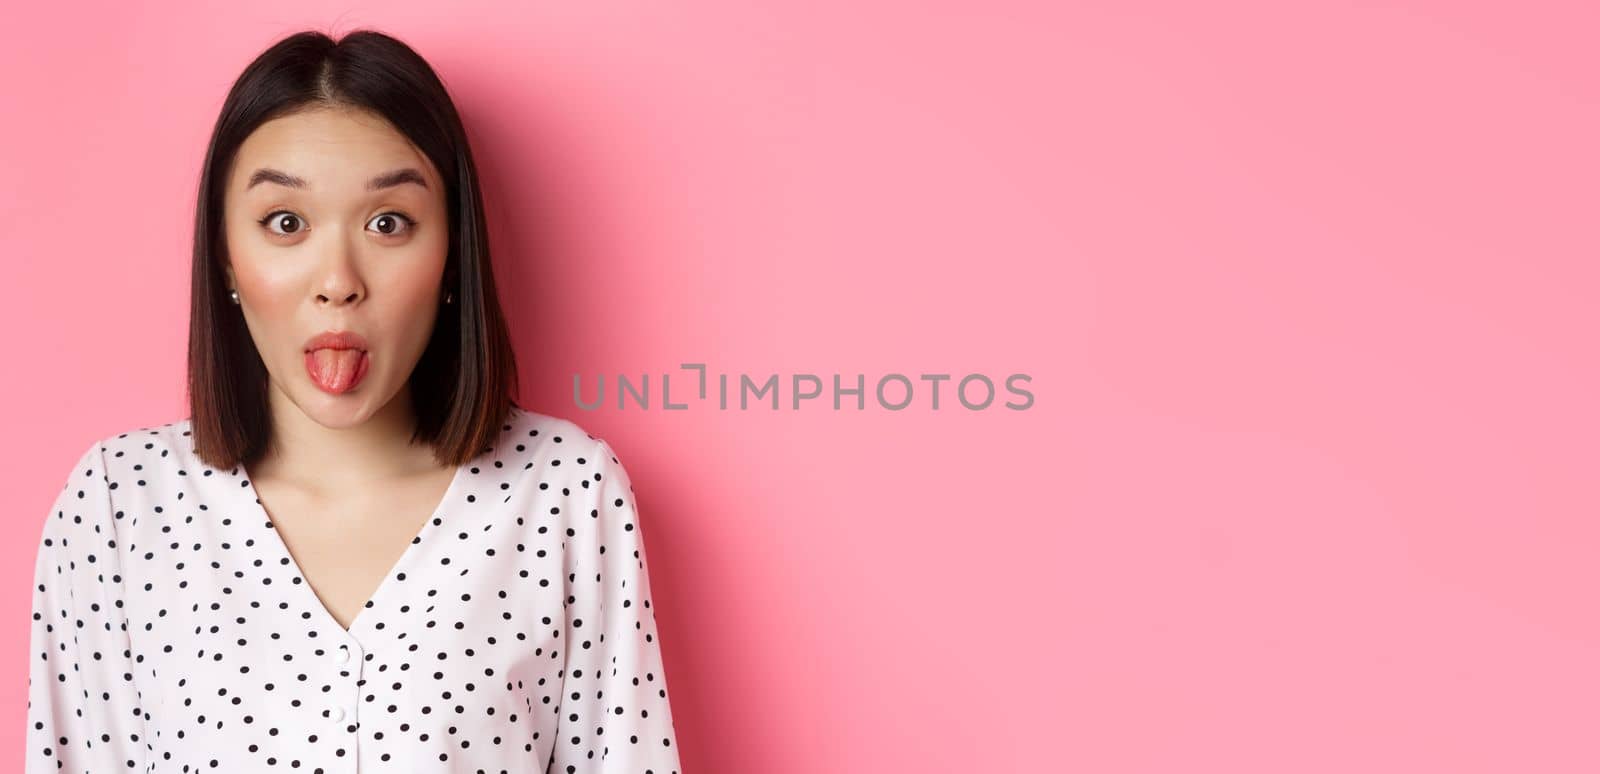 Beauty and lifestyle concept. Close-up of funny and cute asian woman showing tongue, staring at camera silly, standing over pink background.